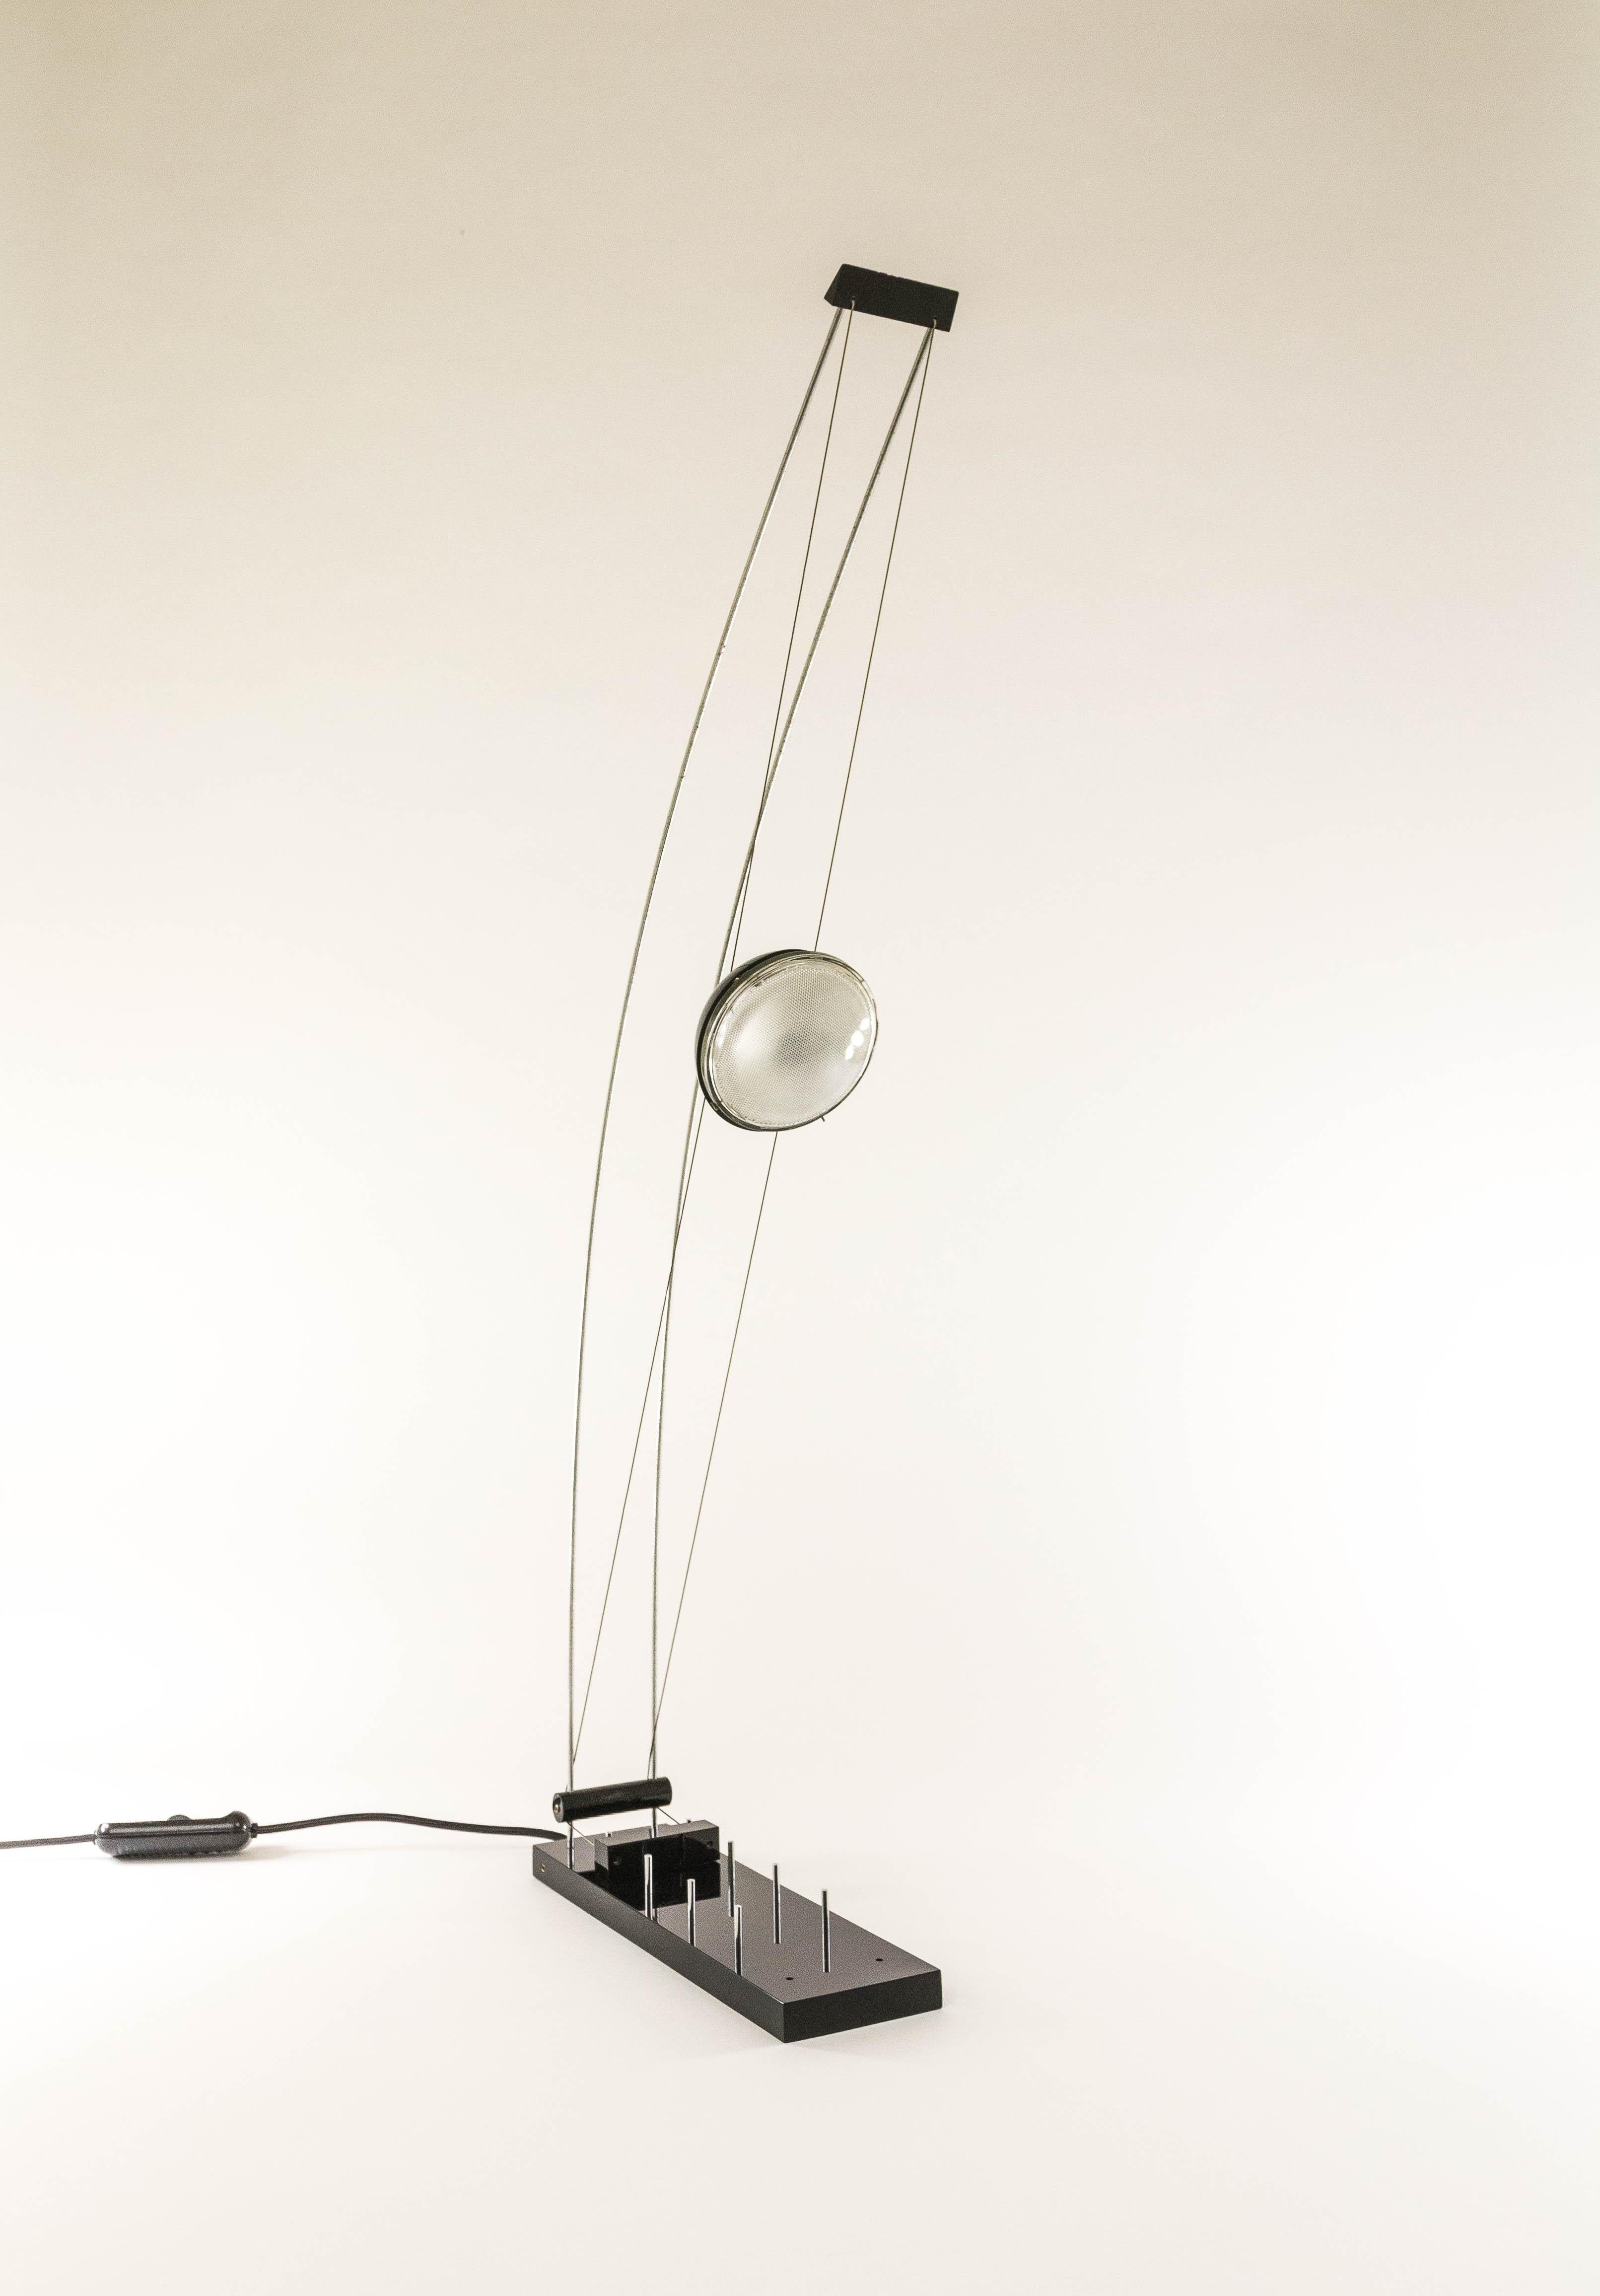 Eye-catching lighting sculpture with the name 'Arco-Nero' designed by Axel Meise for AML Licht + Design GmbH, Munich. This is the second edition of the Arco-nero lamp, made in the 1980s.

The lamp is fully adjustable, the height of the lightbulb